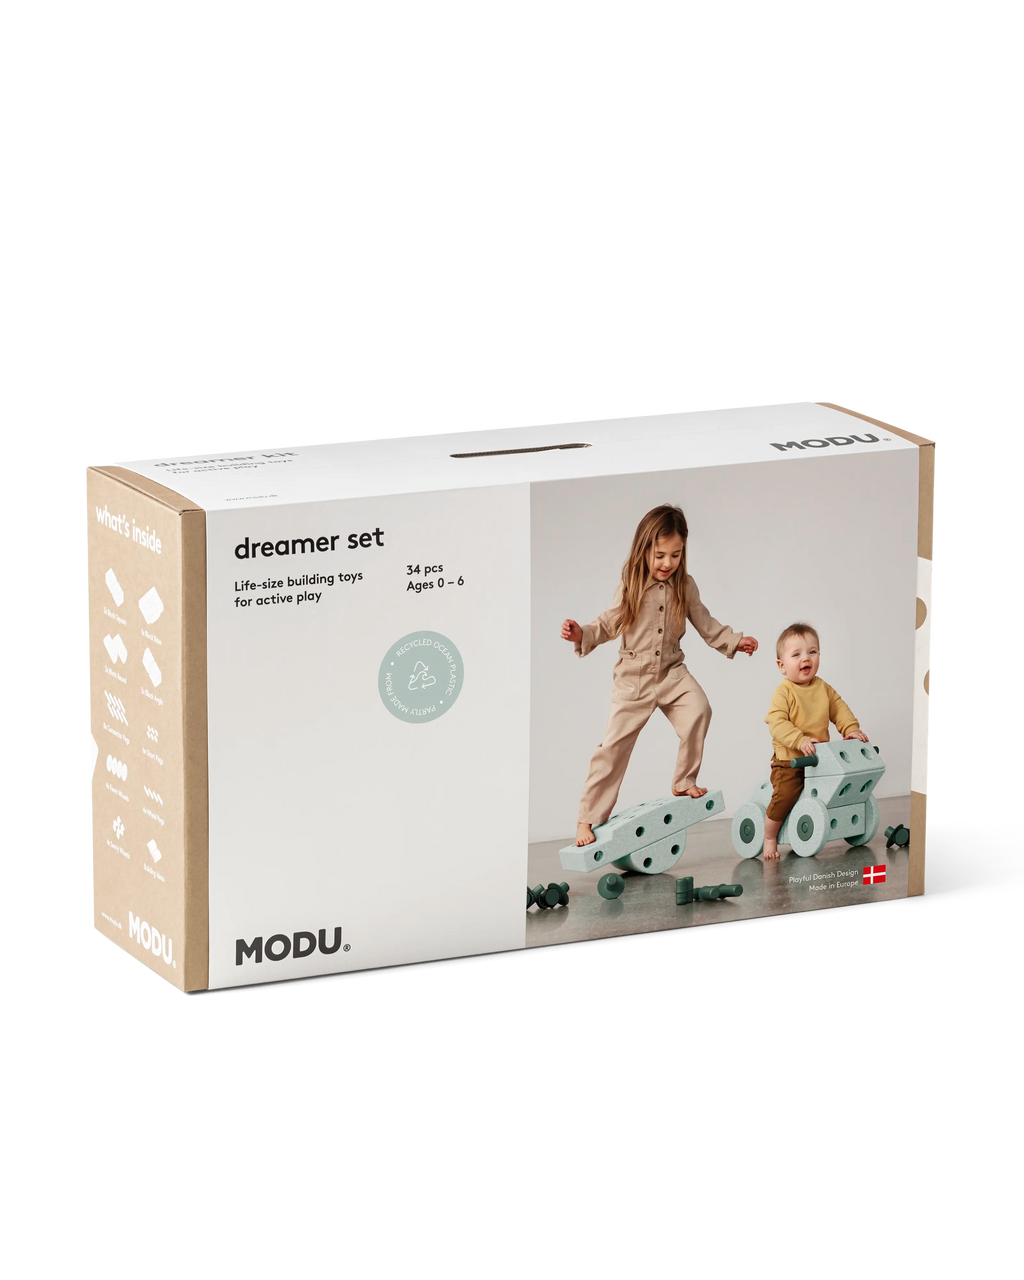 MODU Dreamer-Set in Ocean Mint Forest Green. Life-sized building toy for active play.